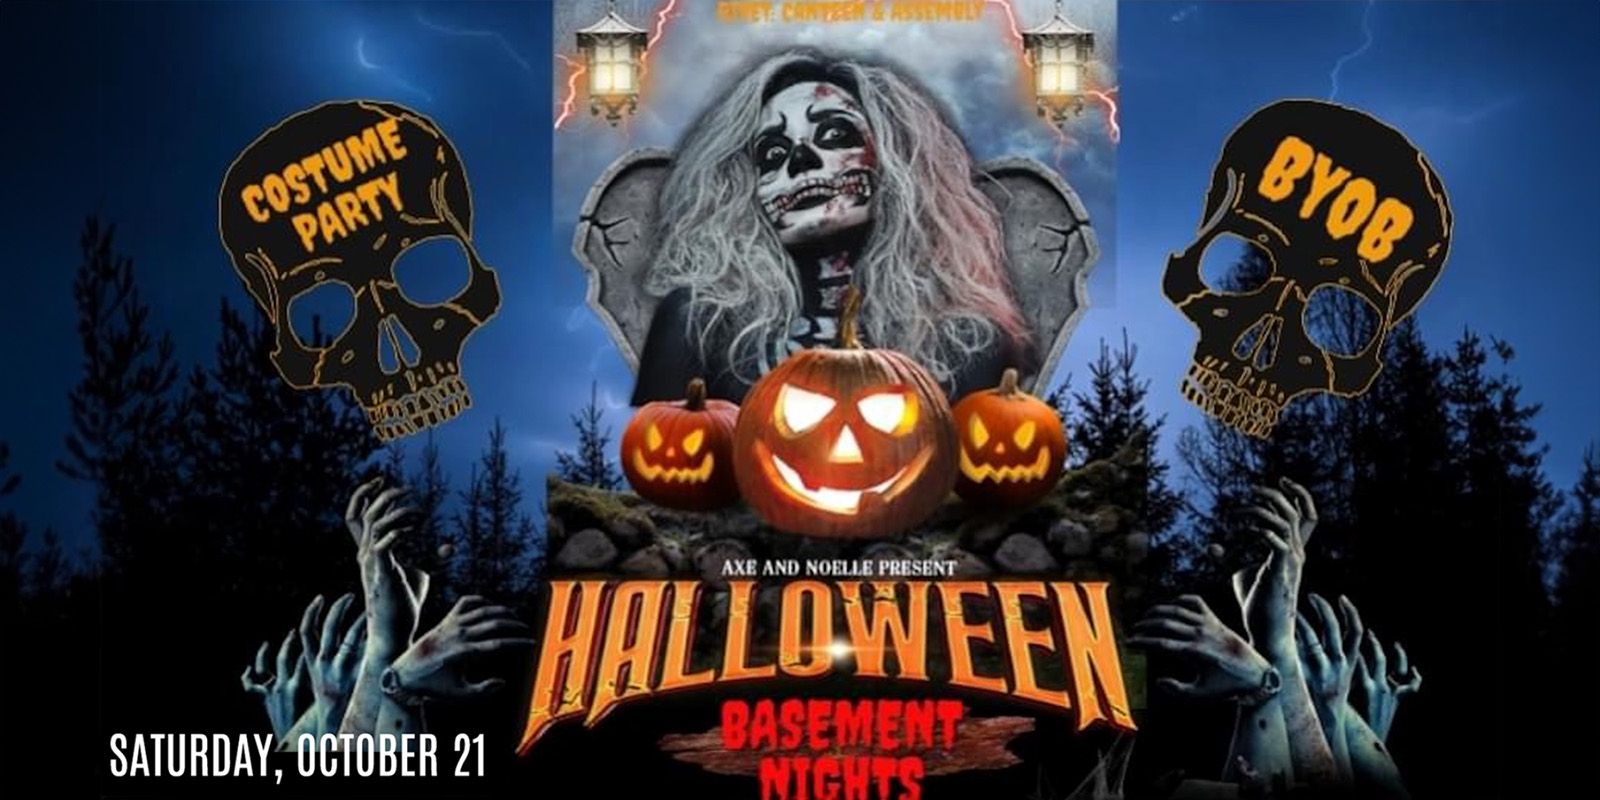 Basement Nights: Halloween Edition at Rivet: Canteen & Assembly on Saturday, October 21st,, 2023. Doors: 9:00 PM. 21+ with ID ONLY.